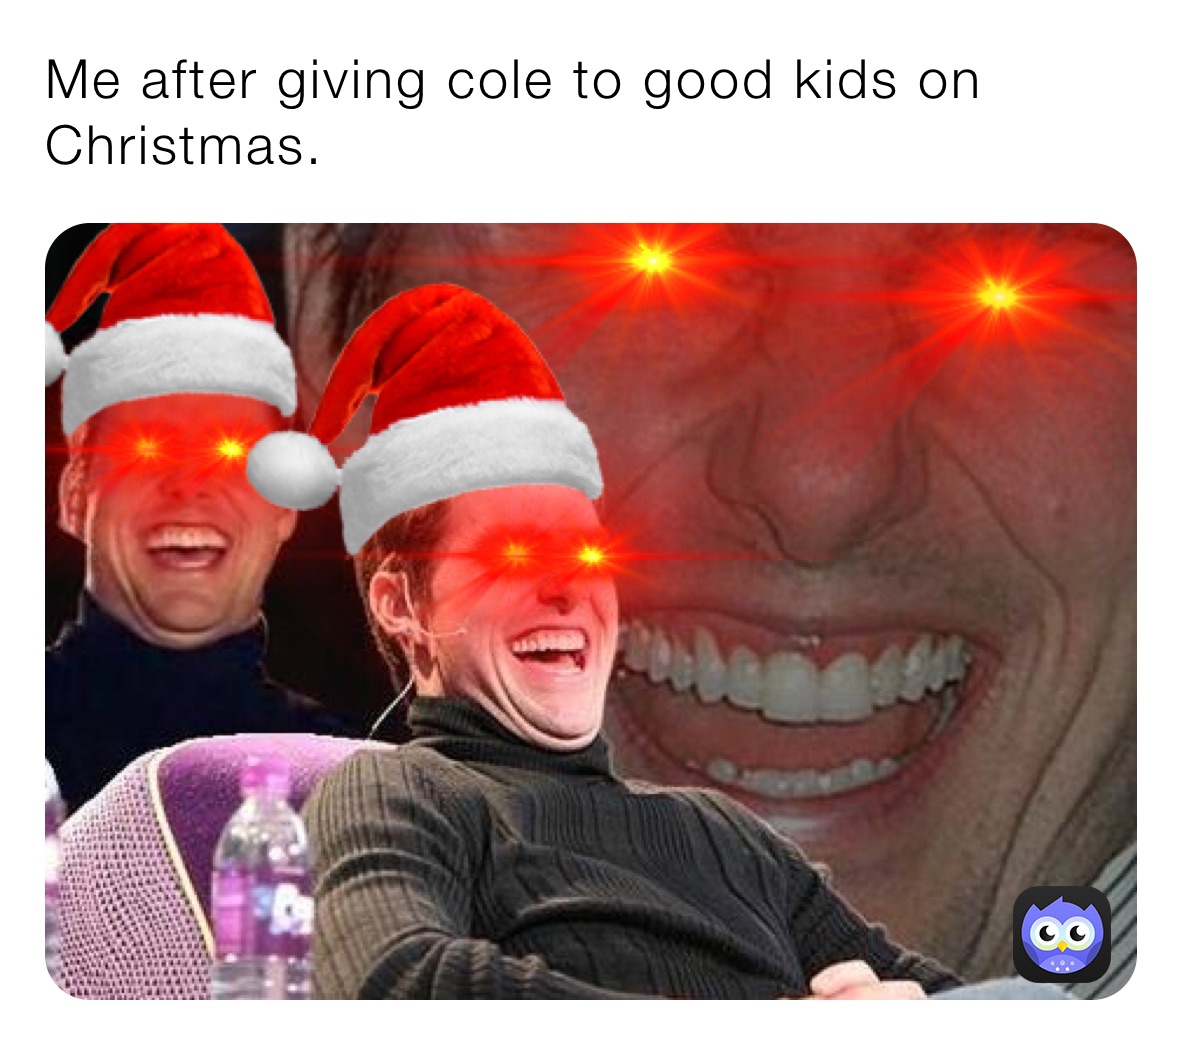 Me after giving cole to good kids on Christmas.